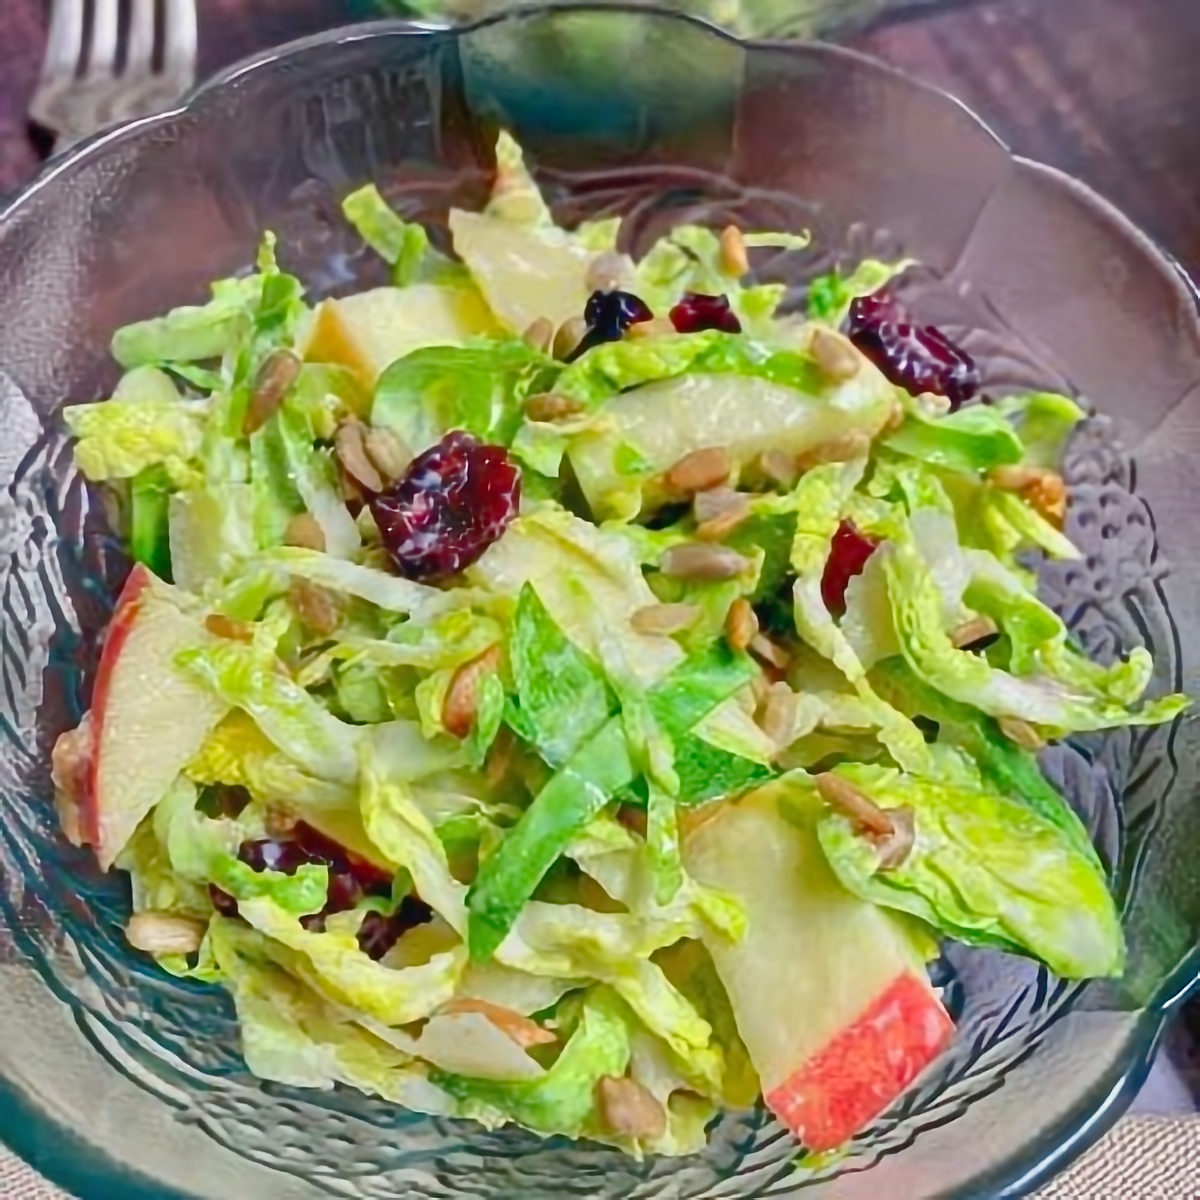 15. Shredded Brussels Sprouts Salad - easy brussel sprouts recipe